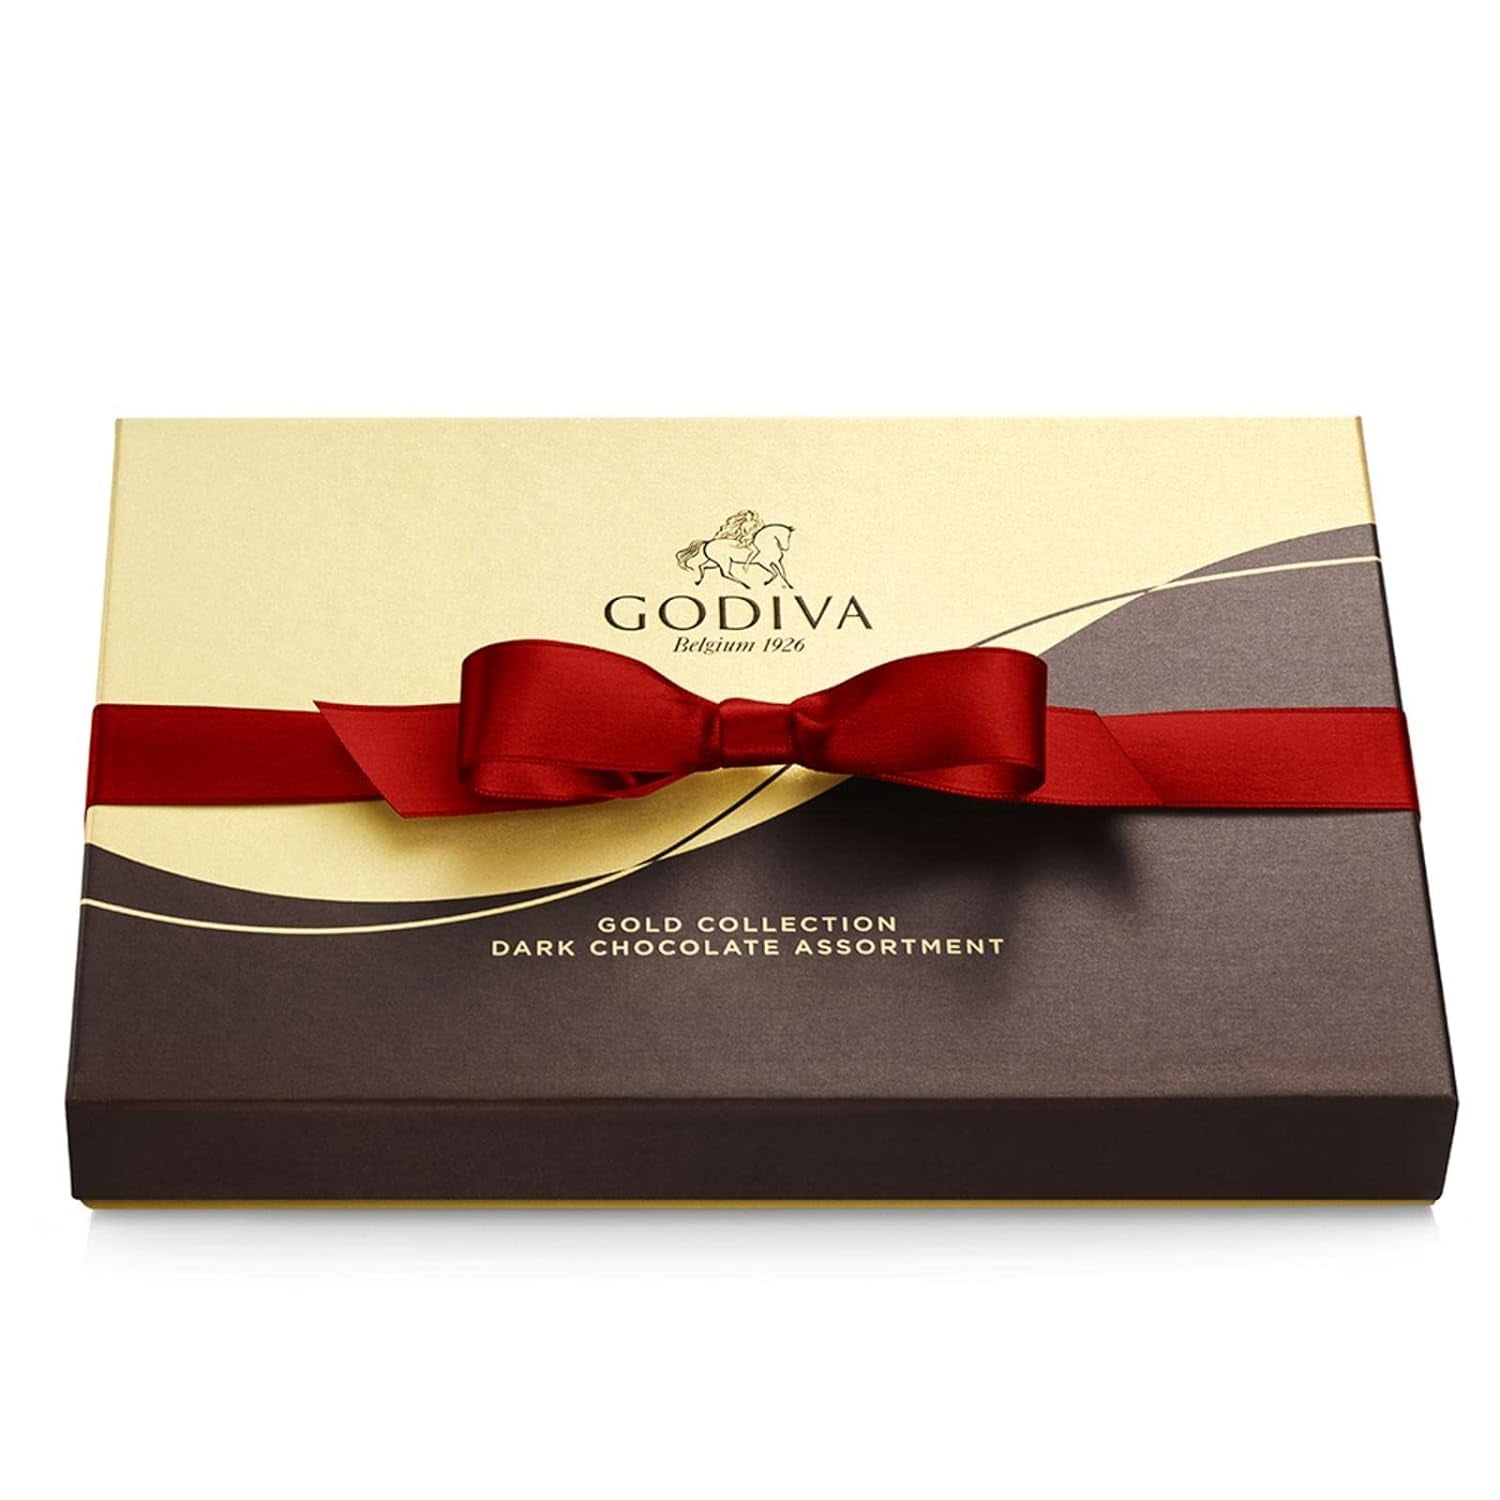 , Dark Chocolate with Gourmet Fillings Gift Box 22 Piece for Chocolate Lovers, 8.4 Ounces